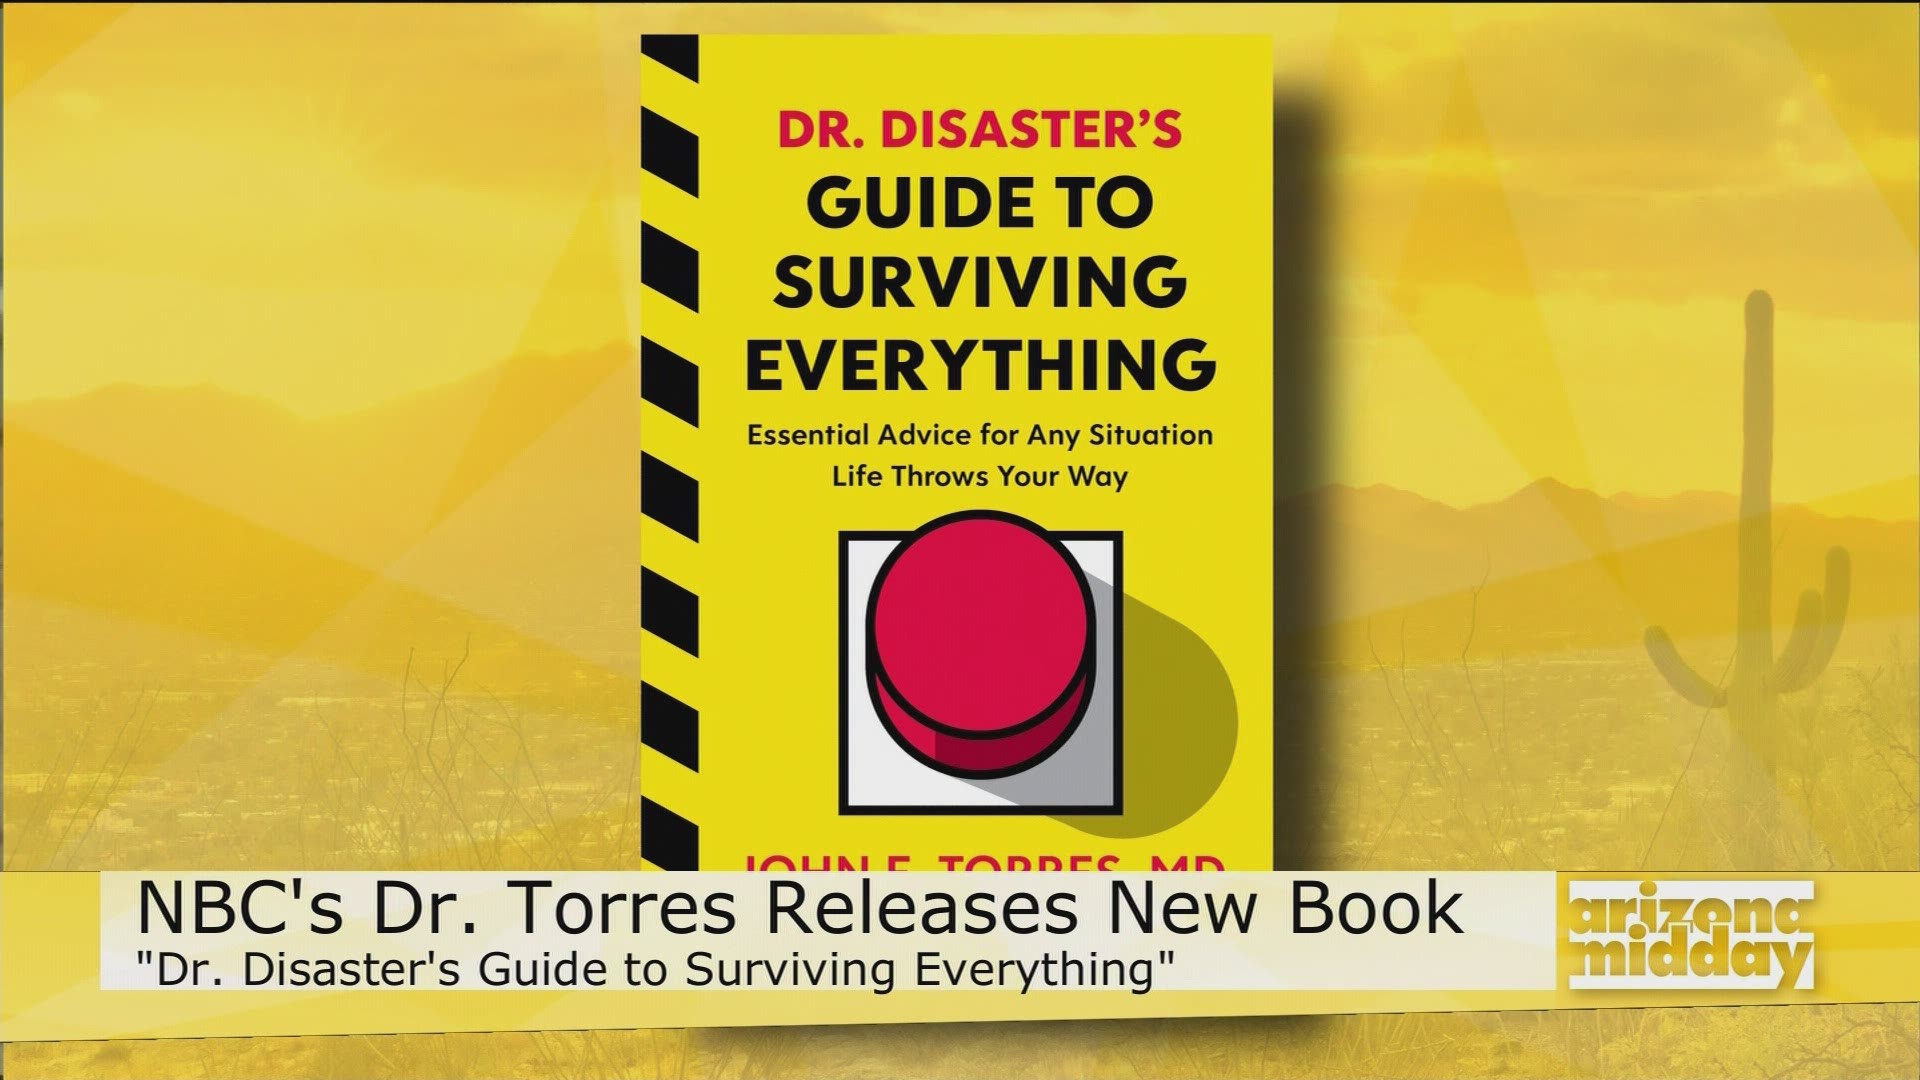 We talk with Dr. John Torres, NBC Medical Correspondent, about his new book on how to survive anything and gives us a sneak peek at some of his tips!